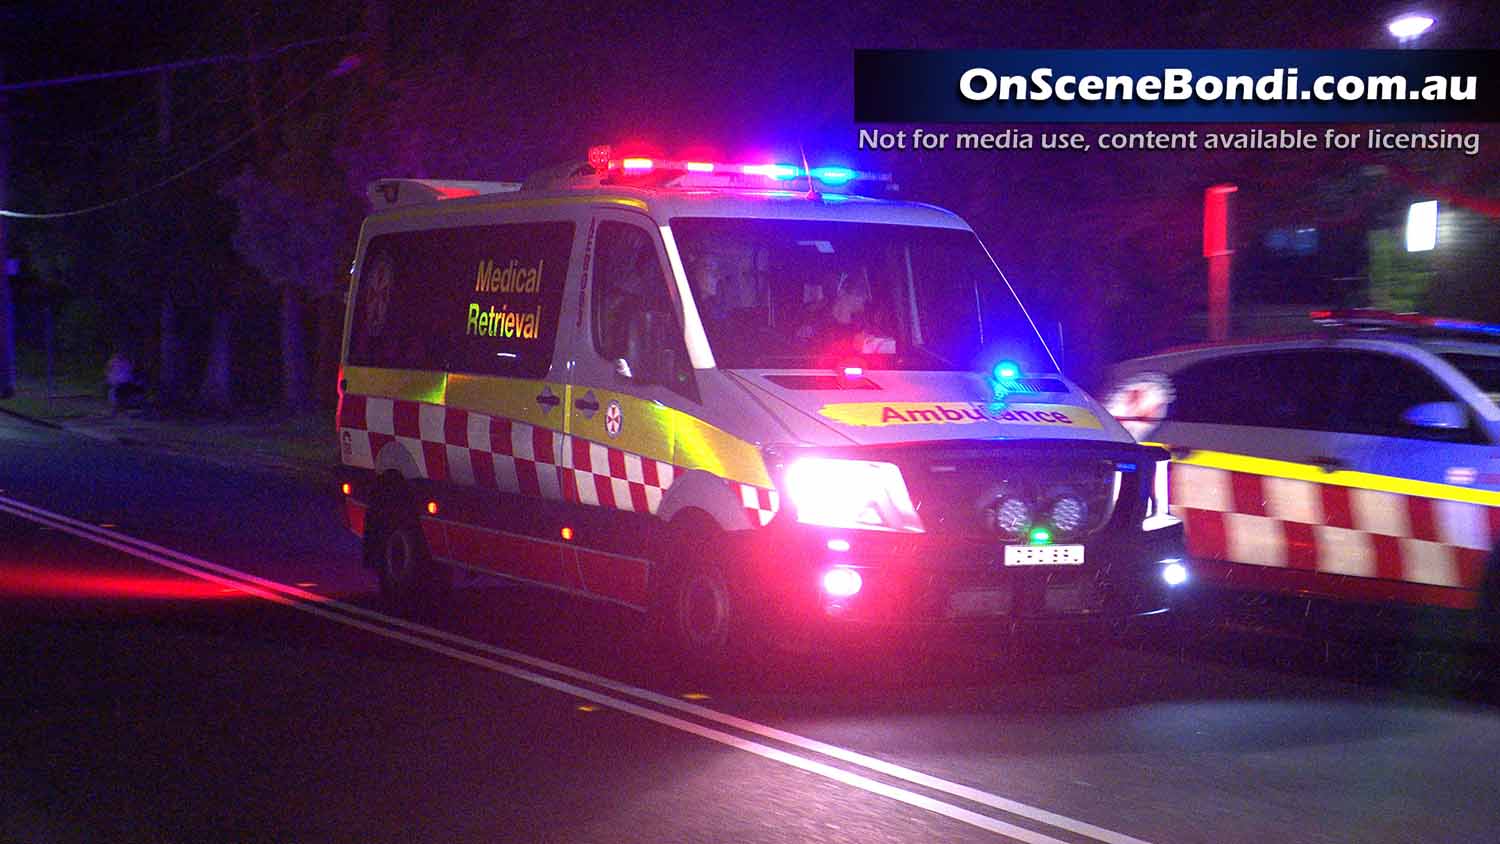 20221026 coogee stabbing 001